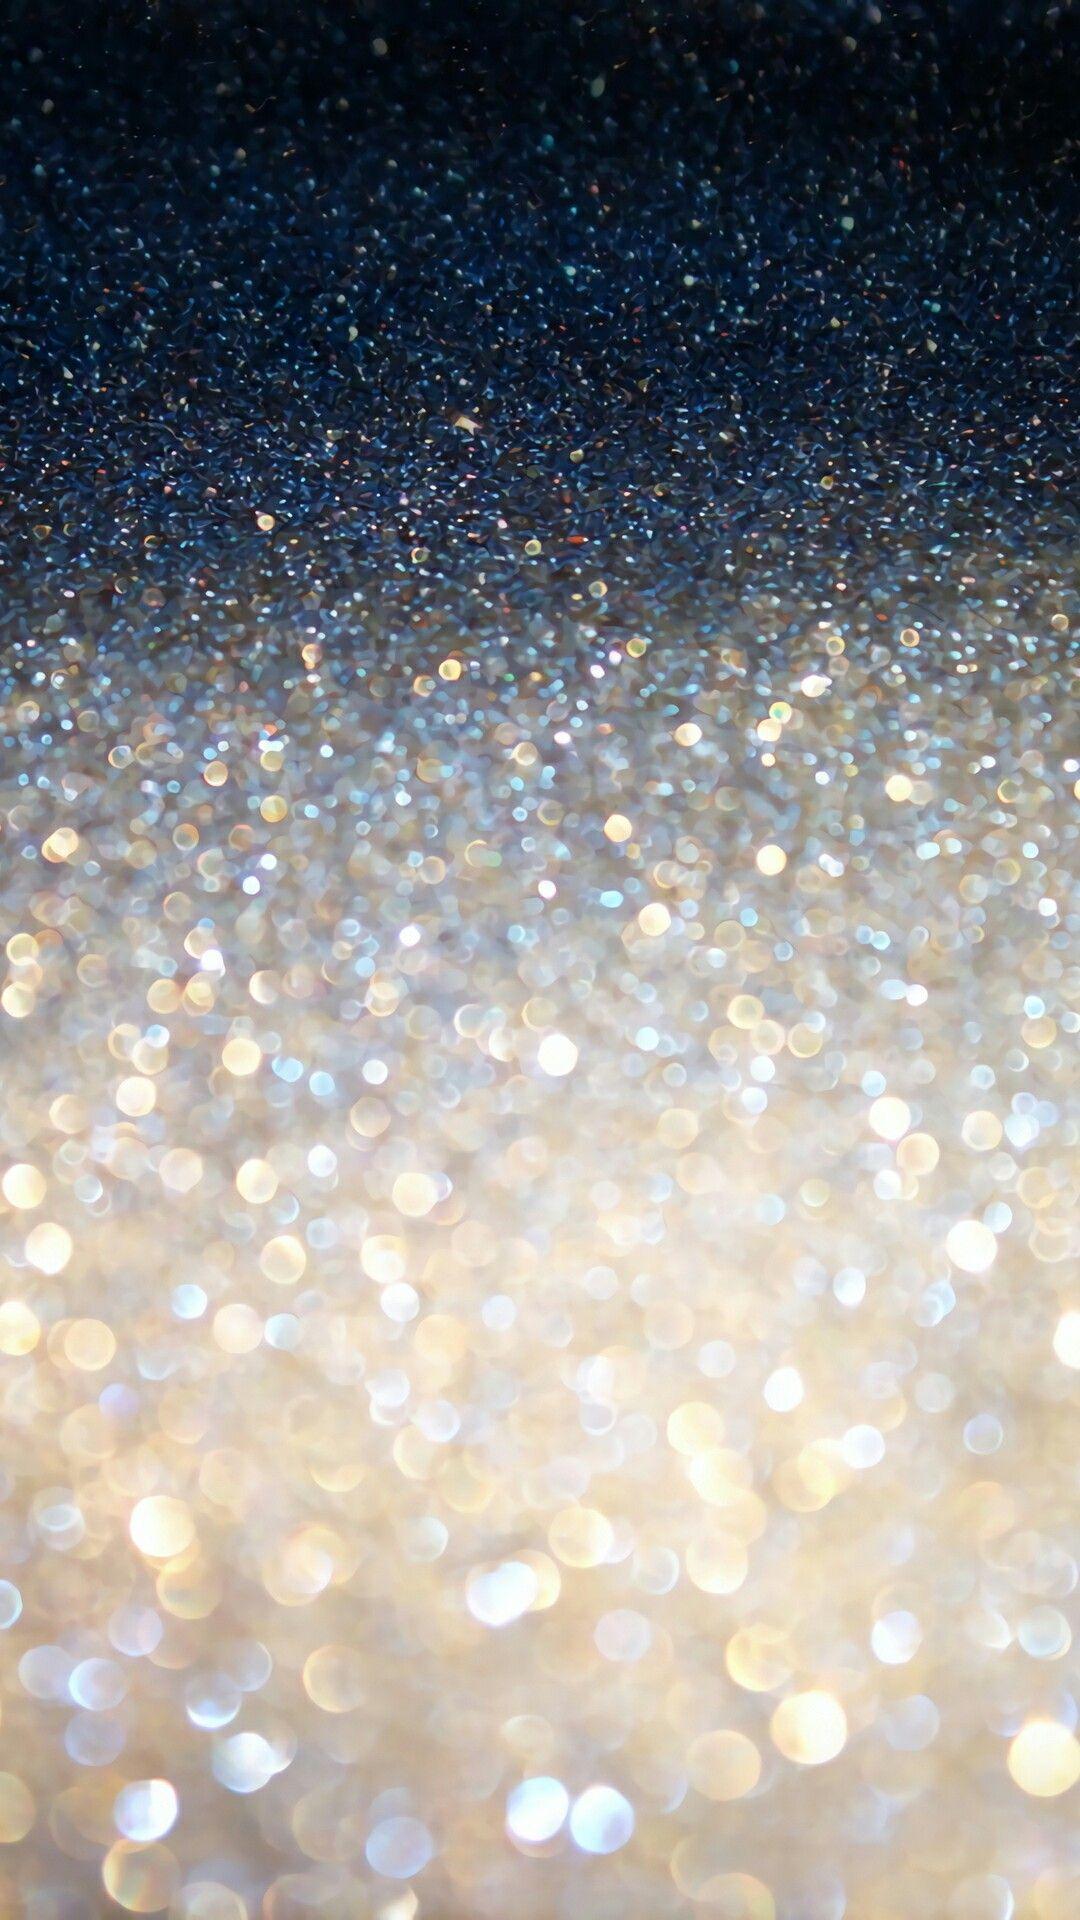 Sparkle IPhone Wallpaper 67 images